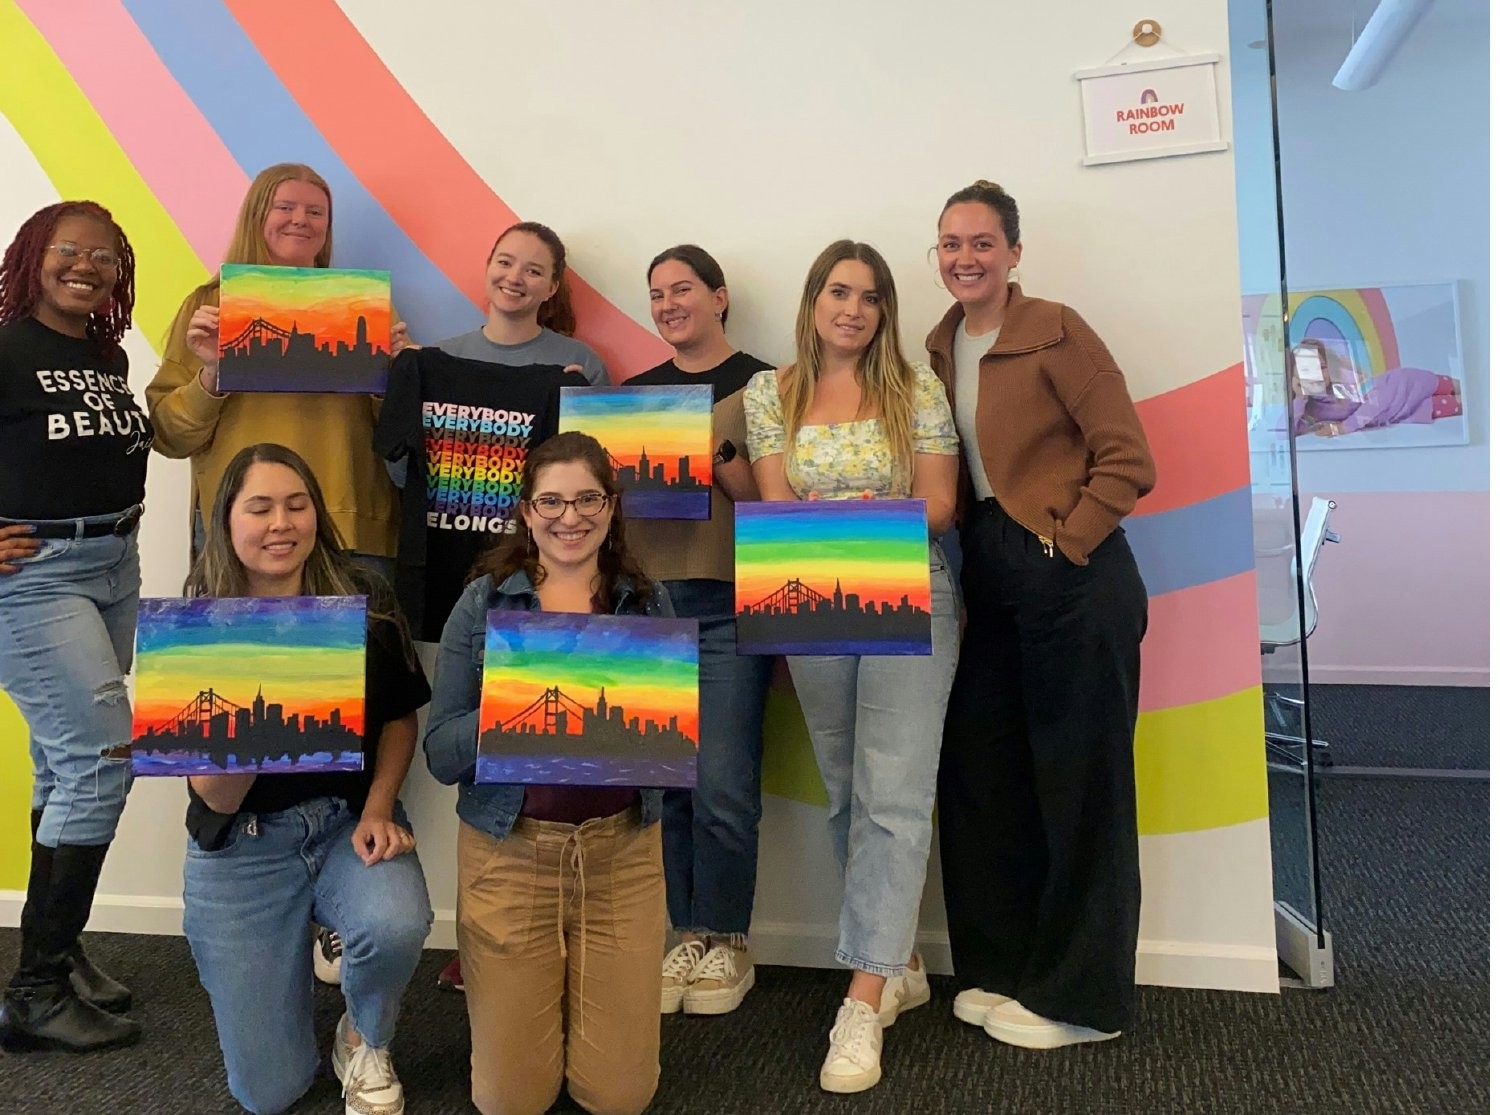 Participating in a paint n' sip event in honor of Pride Month